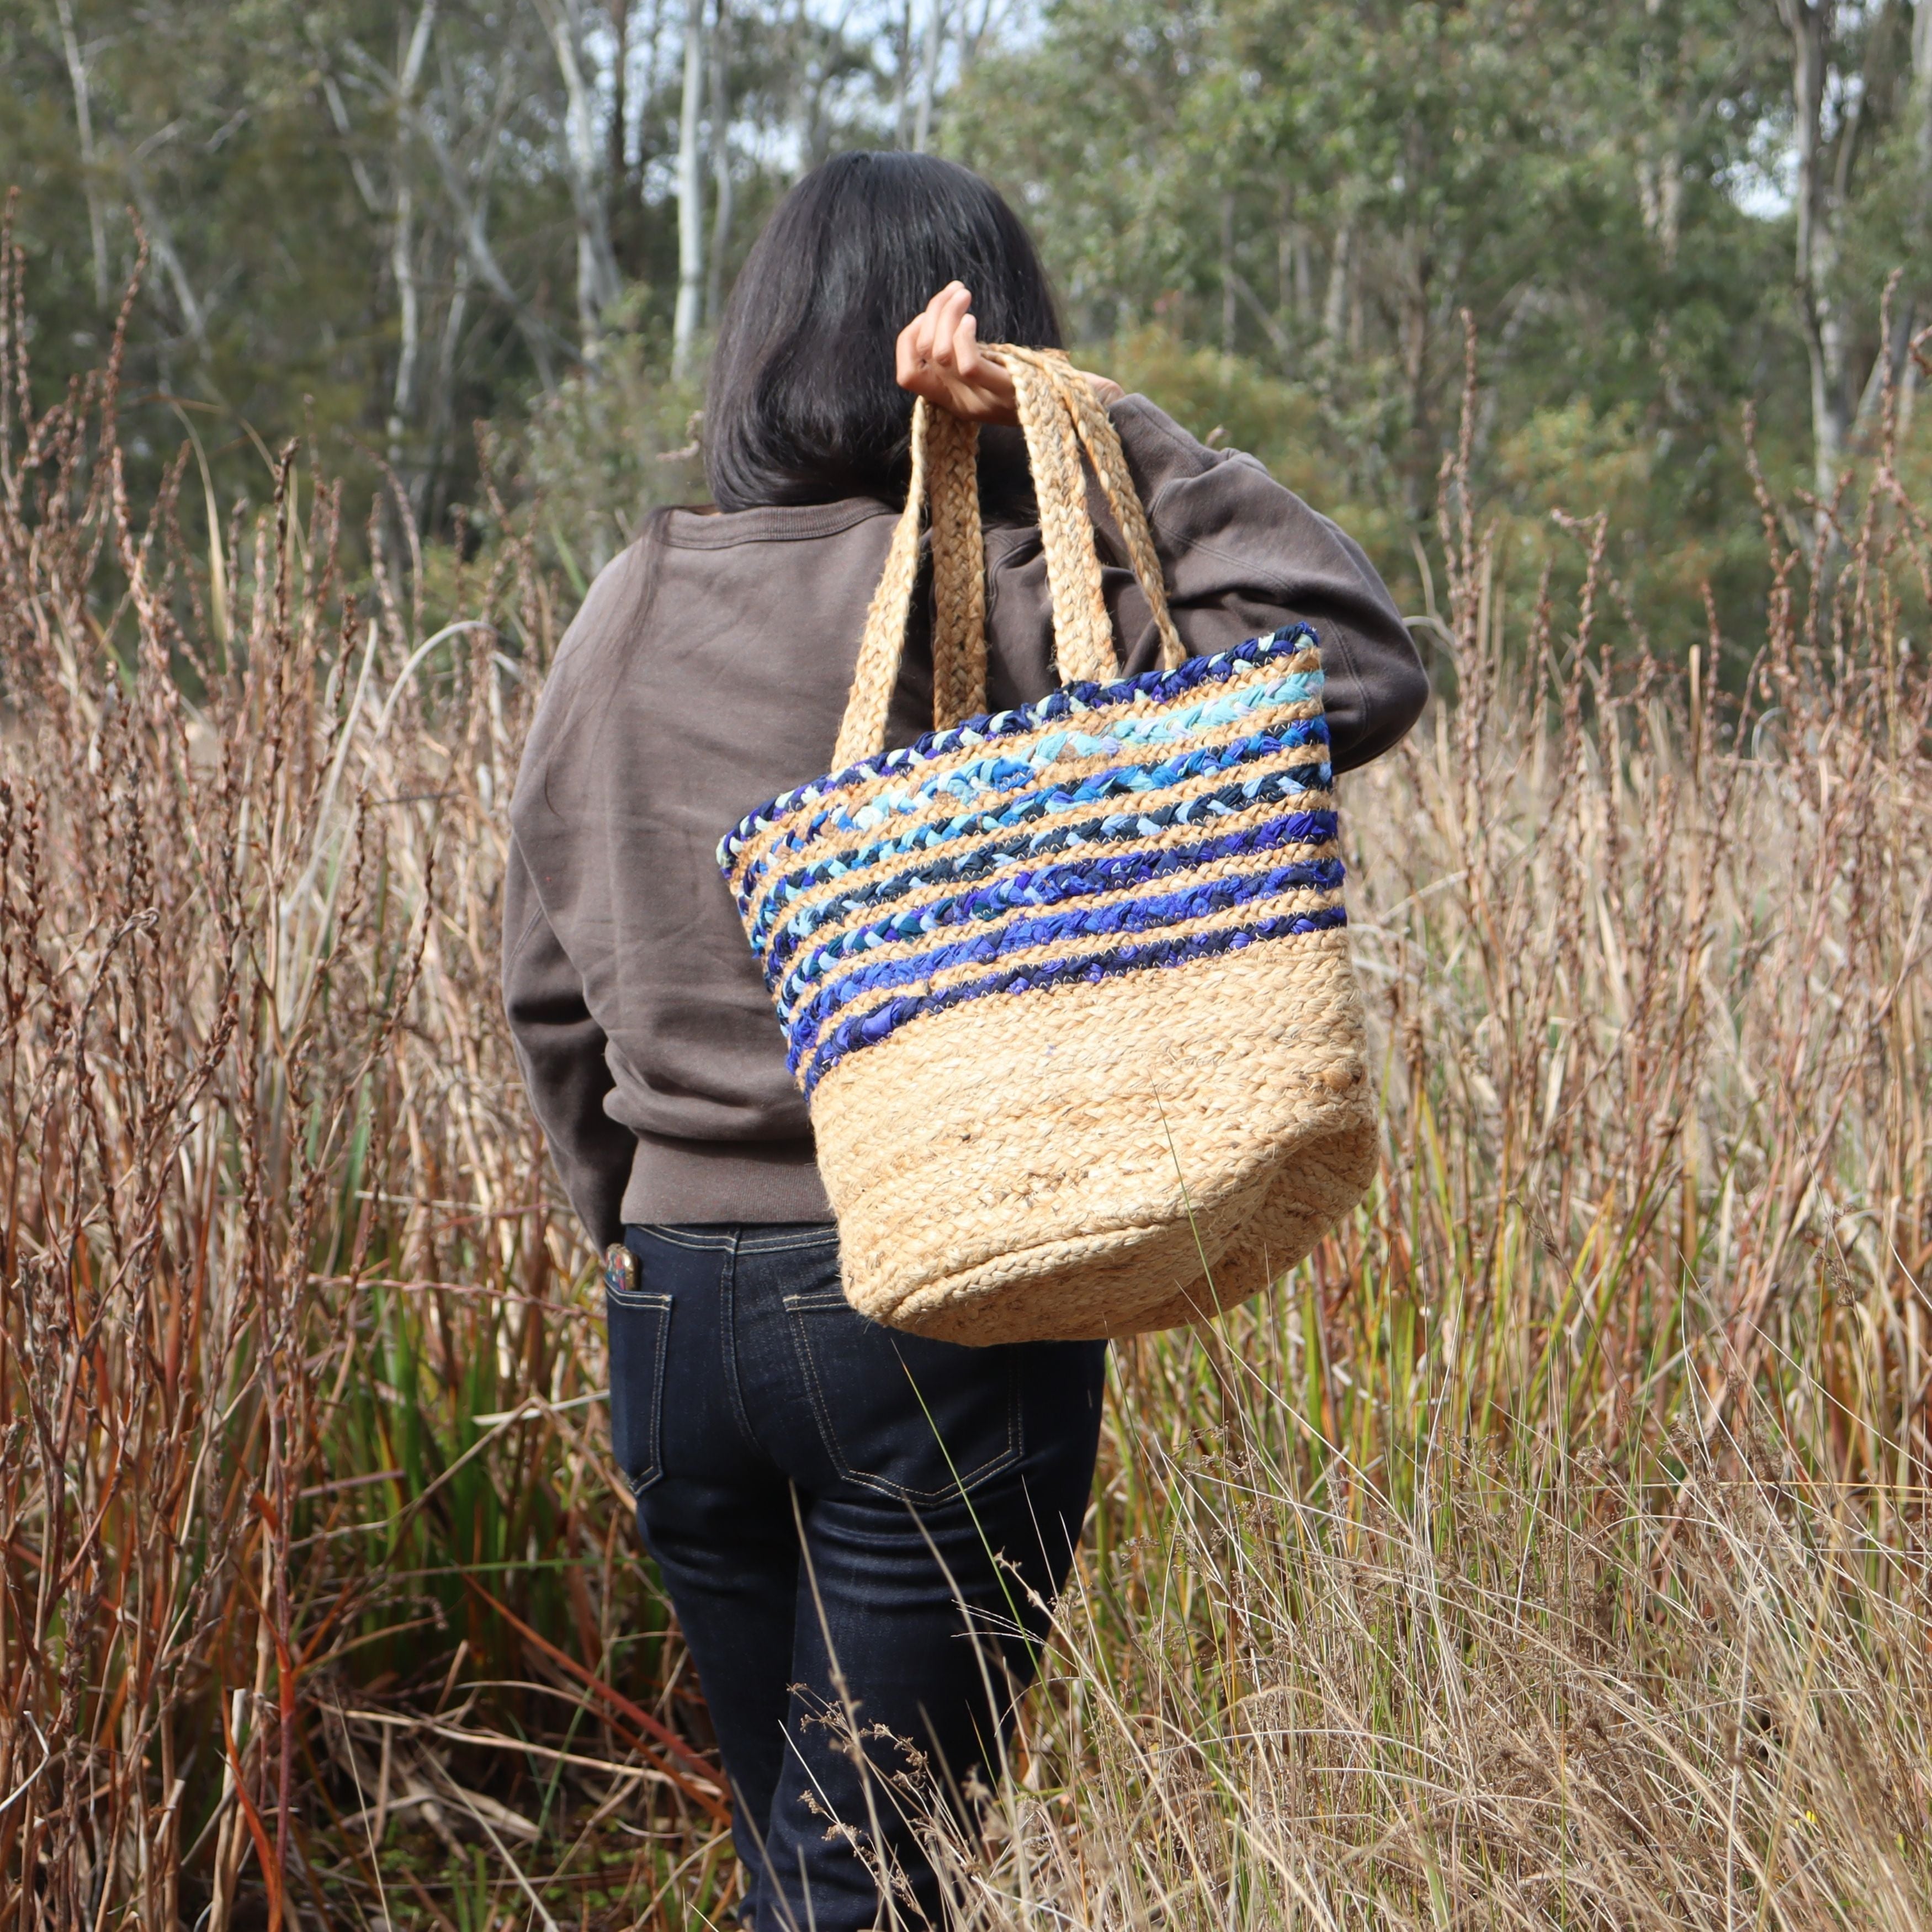 Buy ONEarth Multicolour Jute Tote Bag India-All the Cultures Fabricating  India Handmade Small Dry grass/Natural Cane/Chic Dry Grass bag/handbag from  Manipur/carry tote bag at Amazon.in